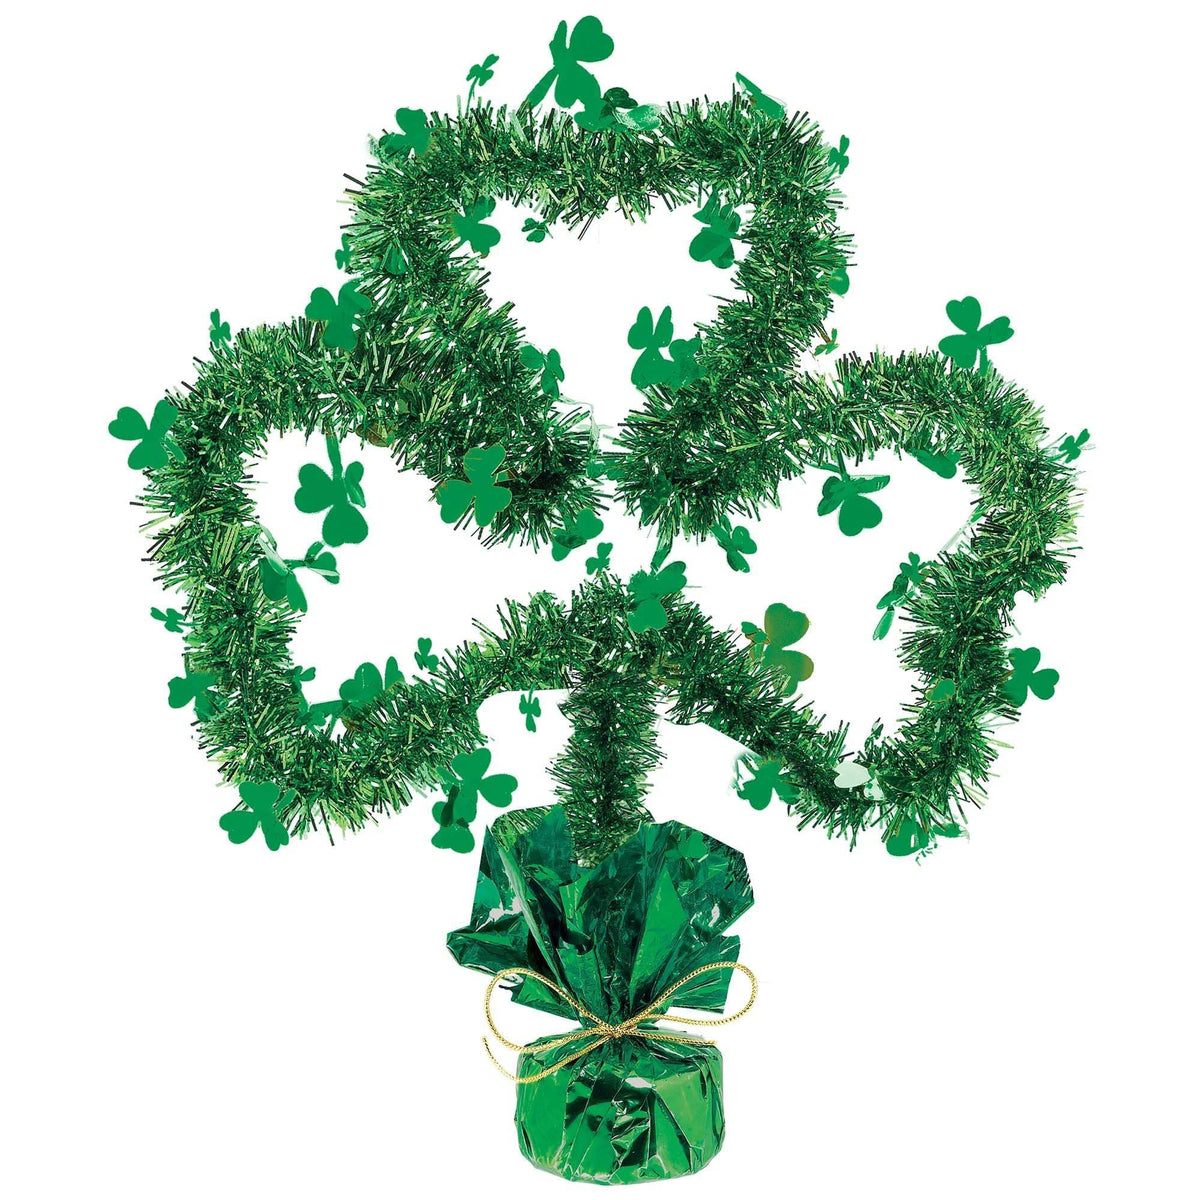 AMSCAN CA St-Patrick St-Patrick's Day Green Clover Shaped Centerpiece, 13.5 X 9.5 Inches, 1 Count